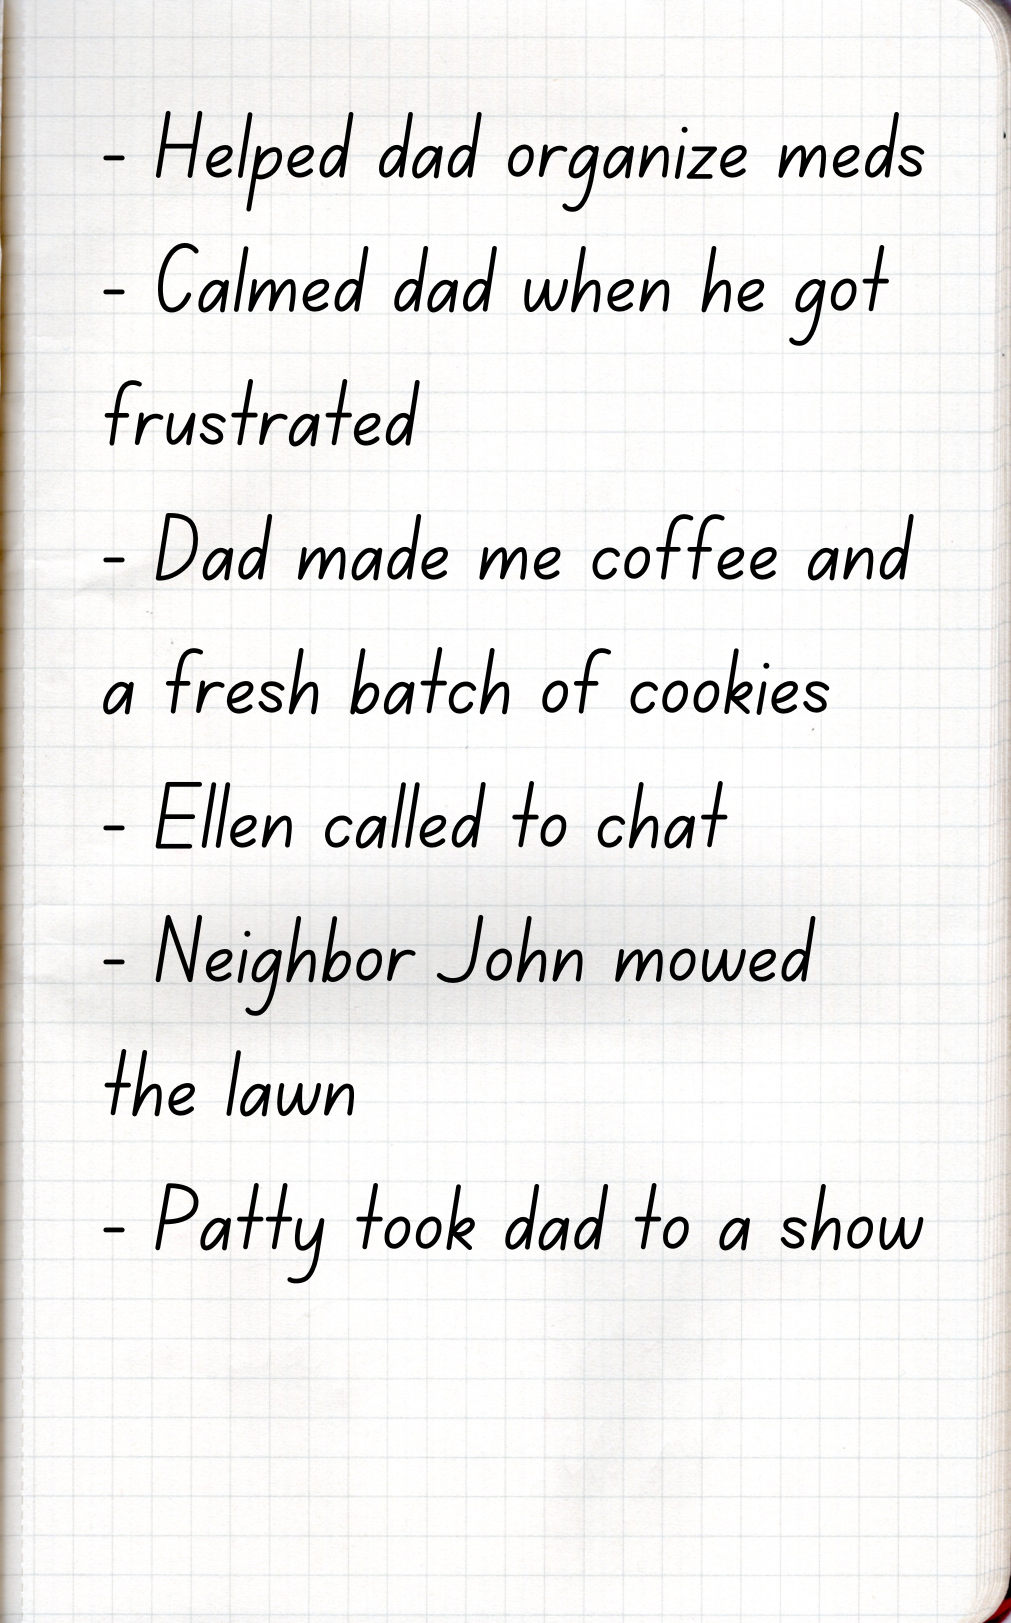 Handwritten list: AT HOME / Helped dad organize meds / Calmed dad when he got frustrated / Dad made me coffee and a fresh batch of cookies / Ellen called to chat / Neighbor John mowed the lawn / Patty took dad to a show